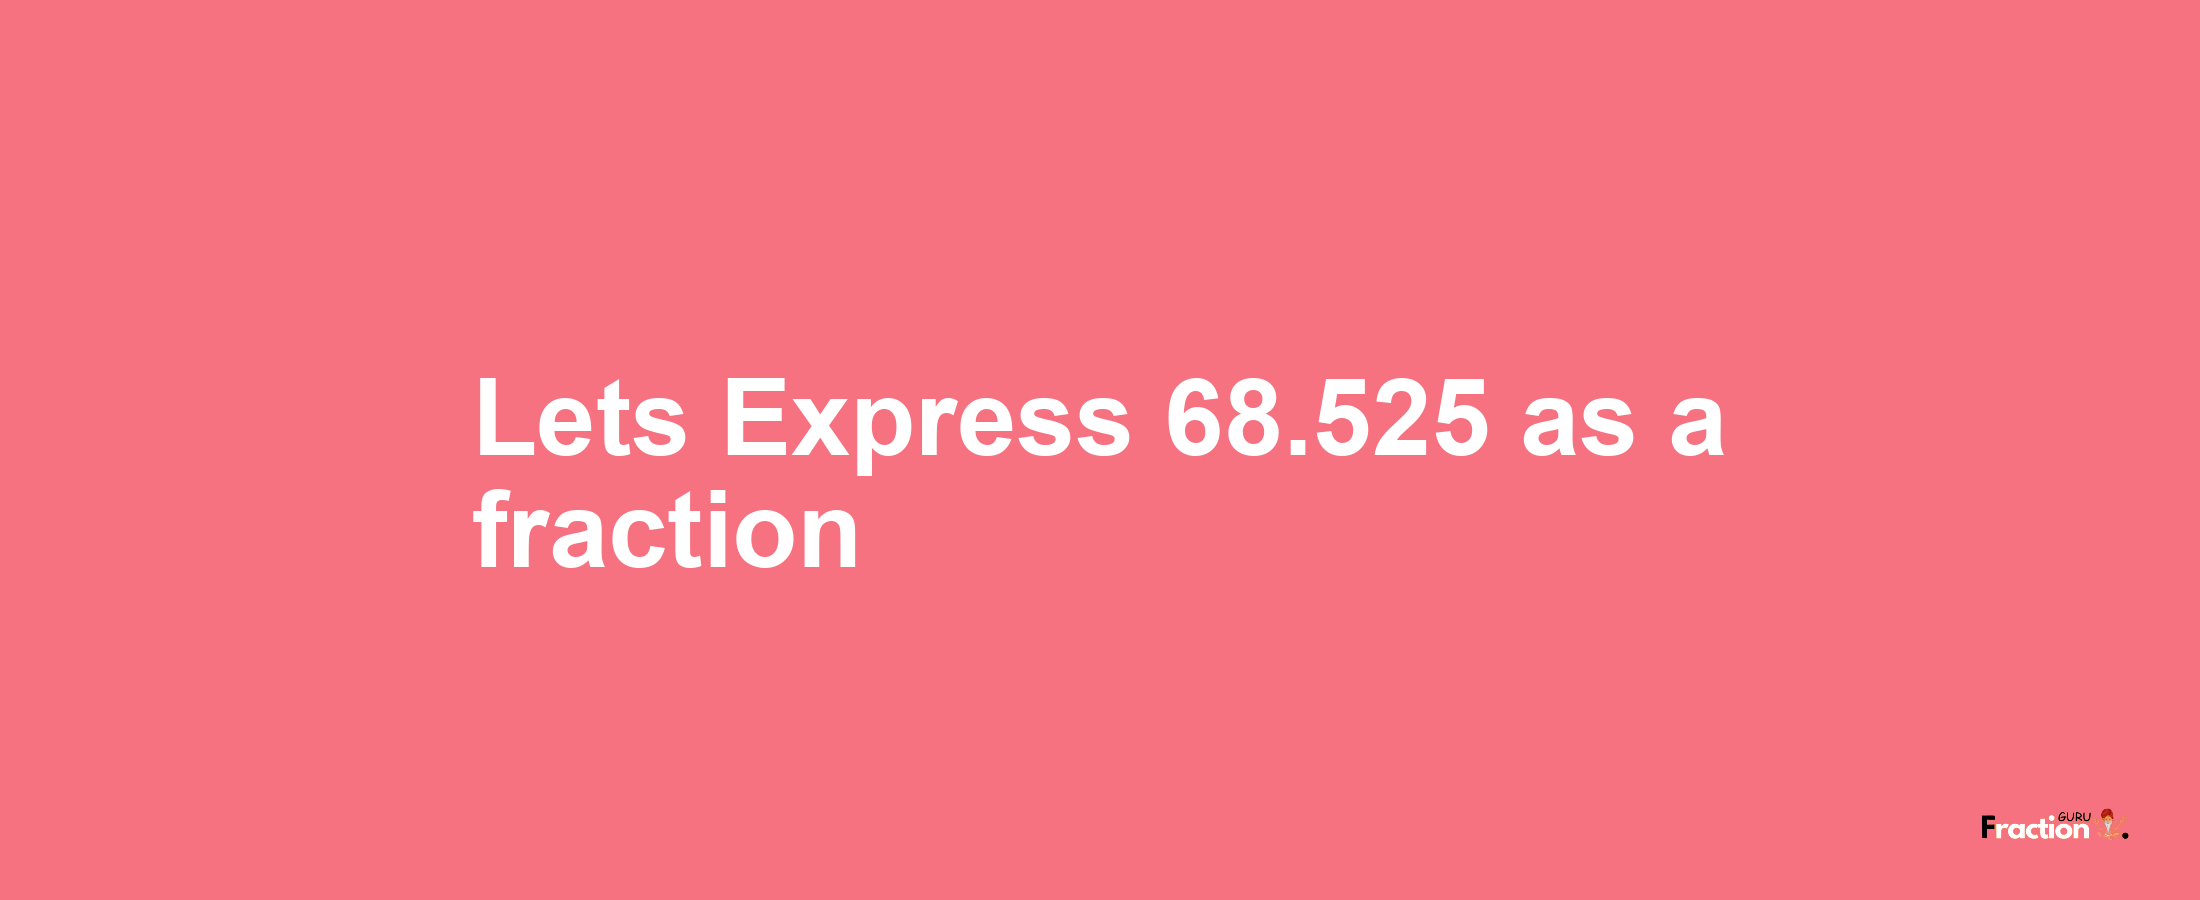 Lets Express 68.525 as afraction